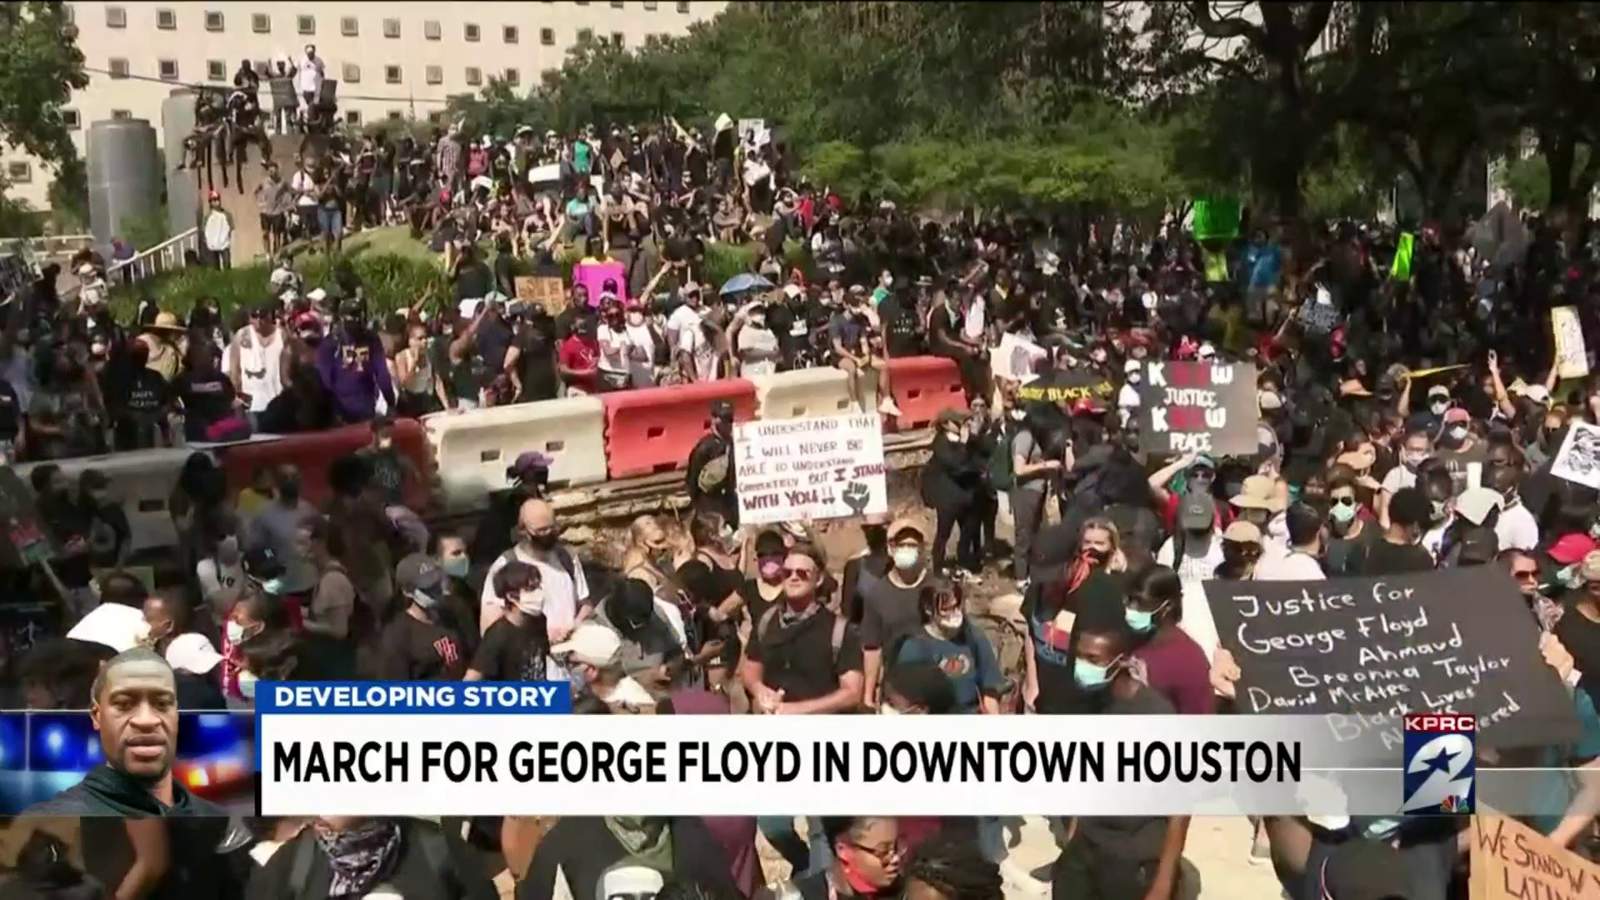 Thousands crowded downtown Houston for George Floyd march